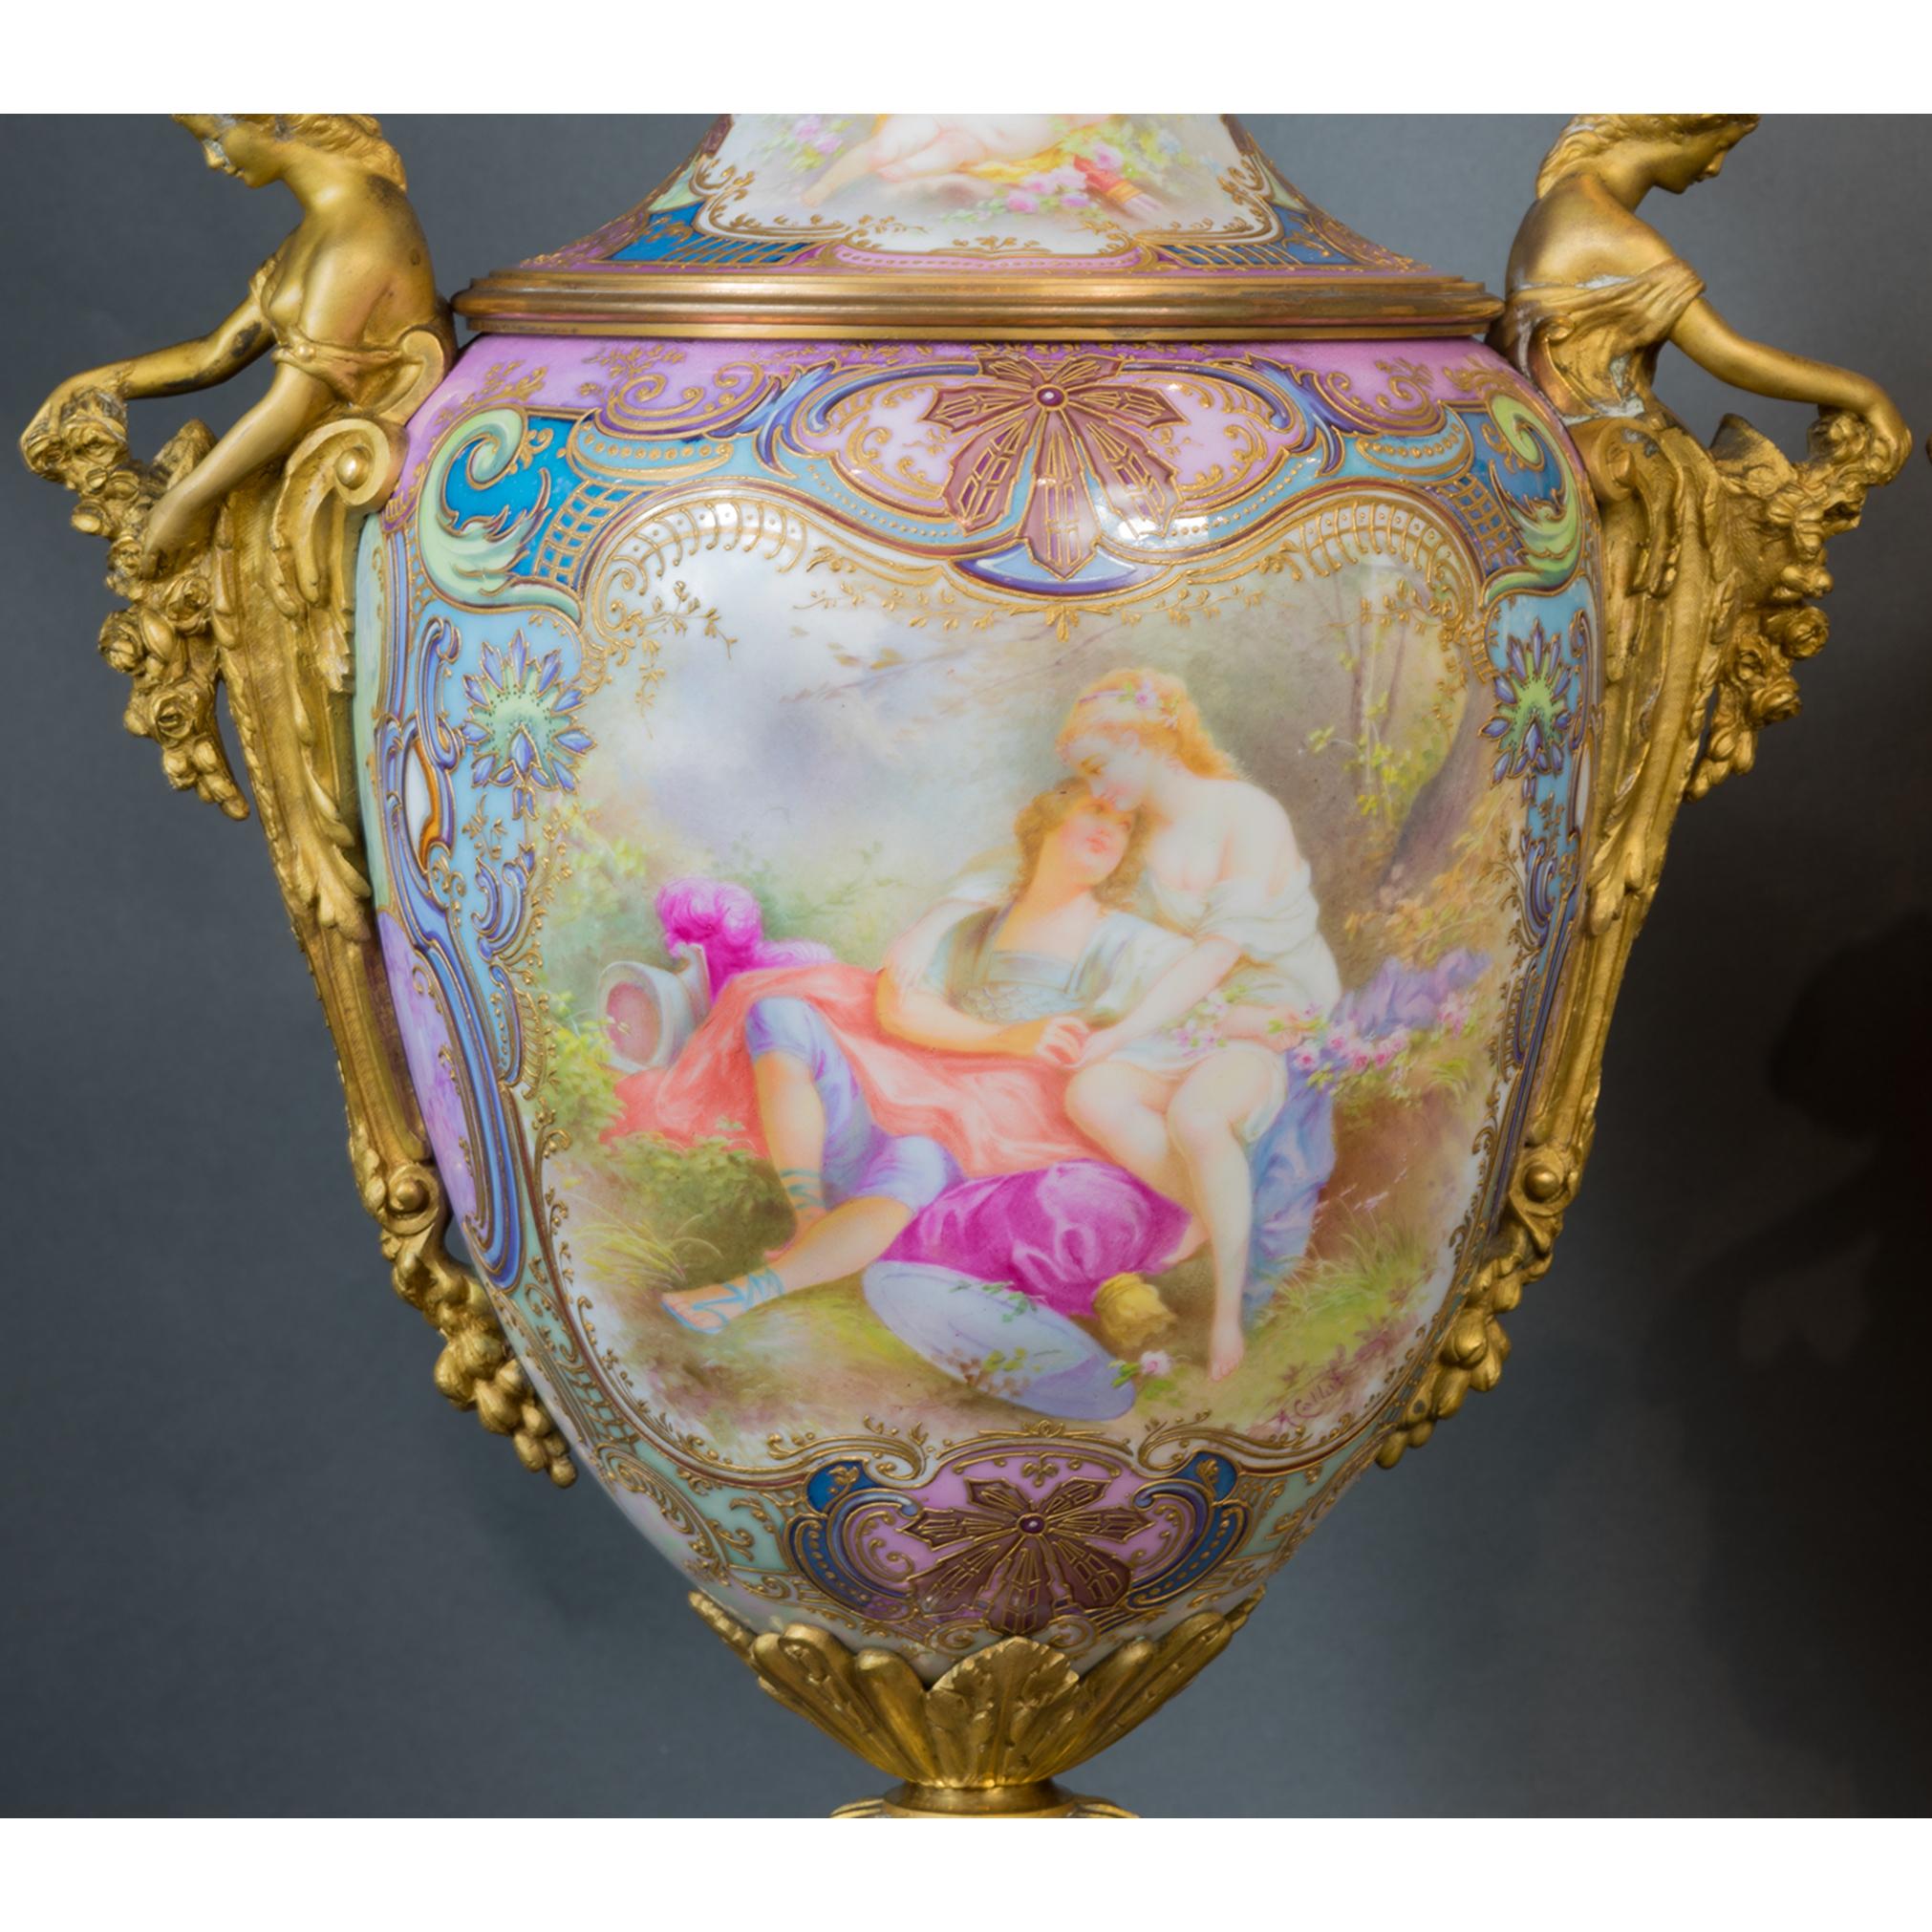 Pair of Ormolu-Mounted Sevres Style Vases with Garden Scene by A. Collot In Good Condition For Sale In New York, NY